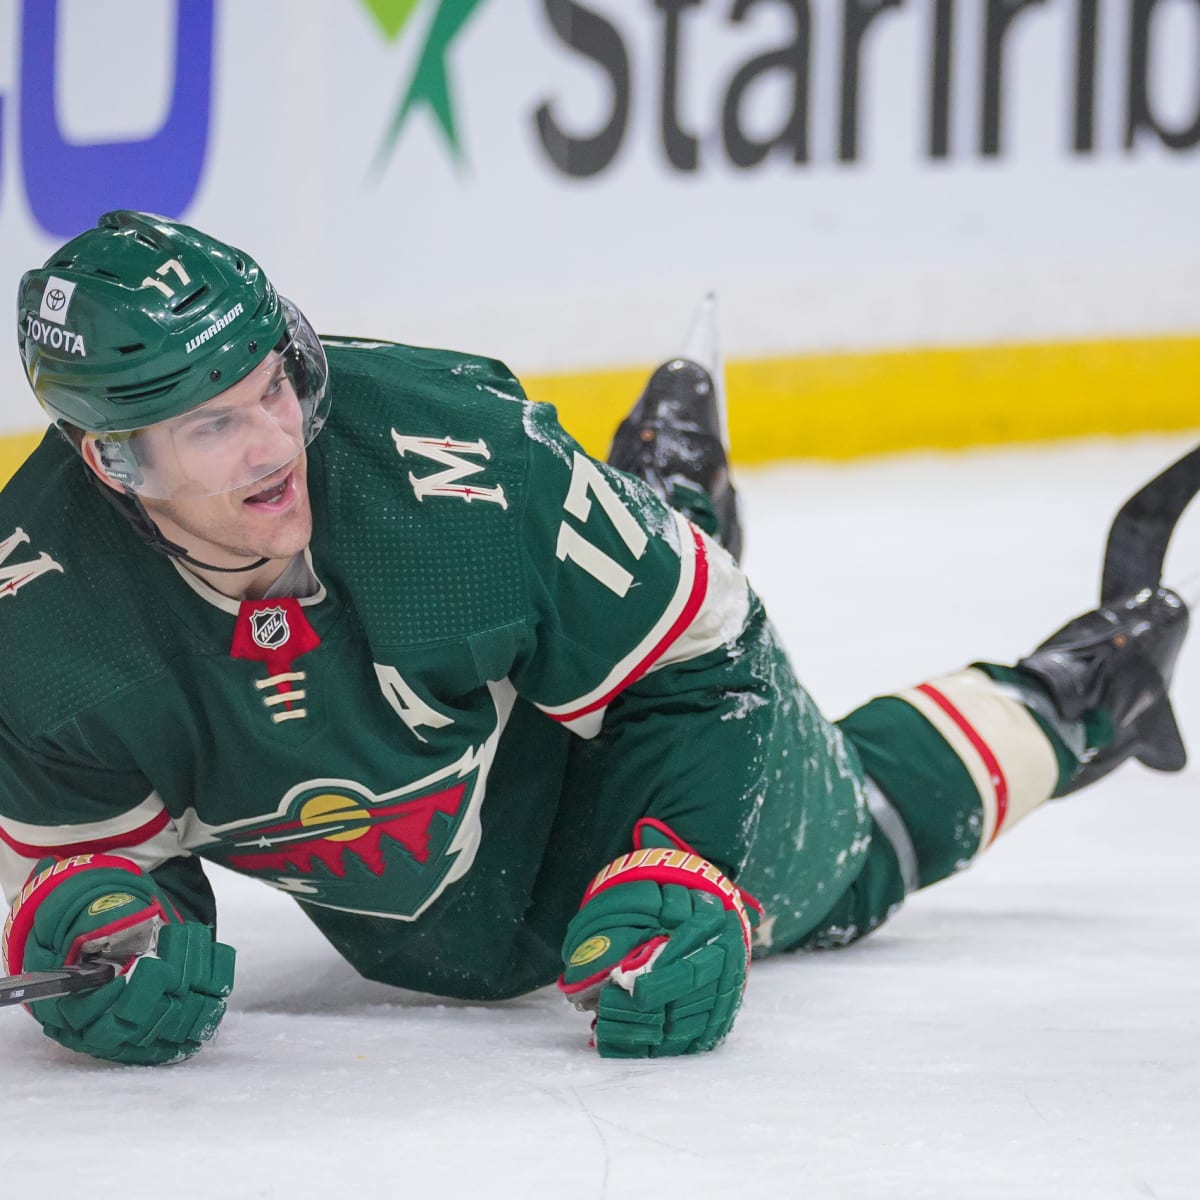 Wild's newly re-signed Marcus Foligno is back to full health, raring to go